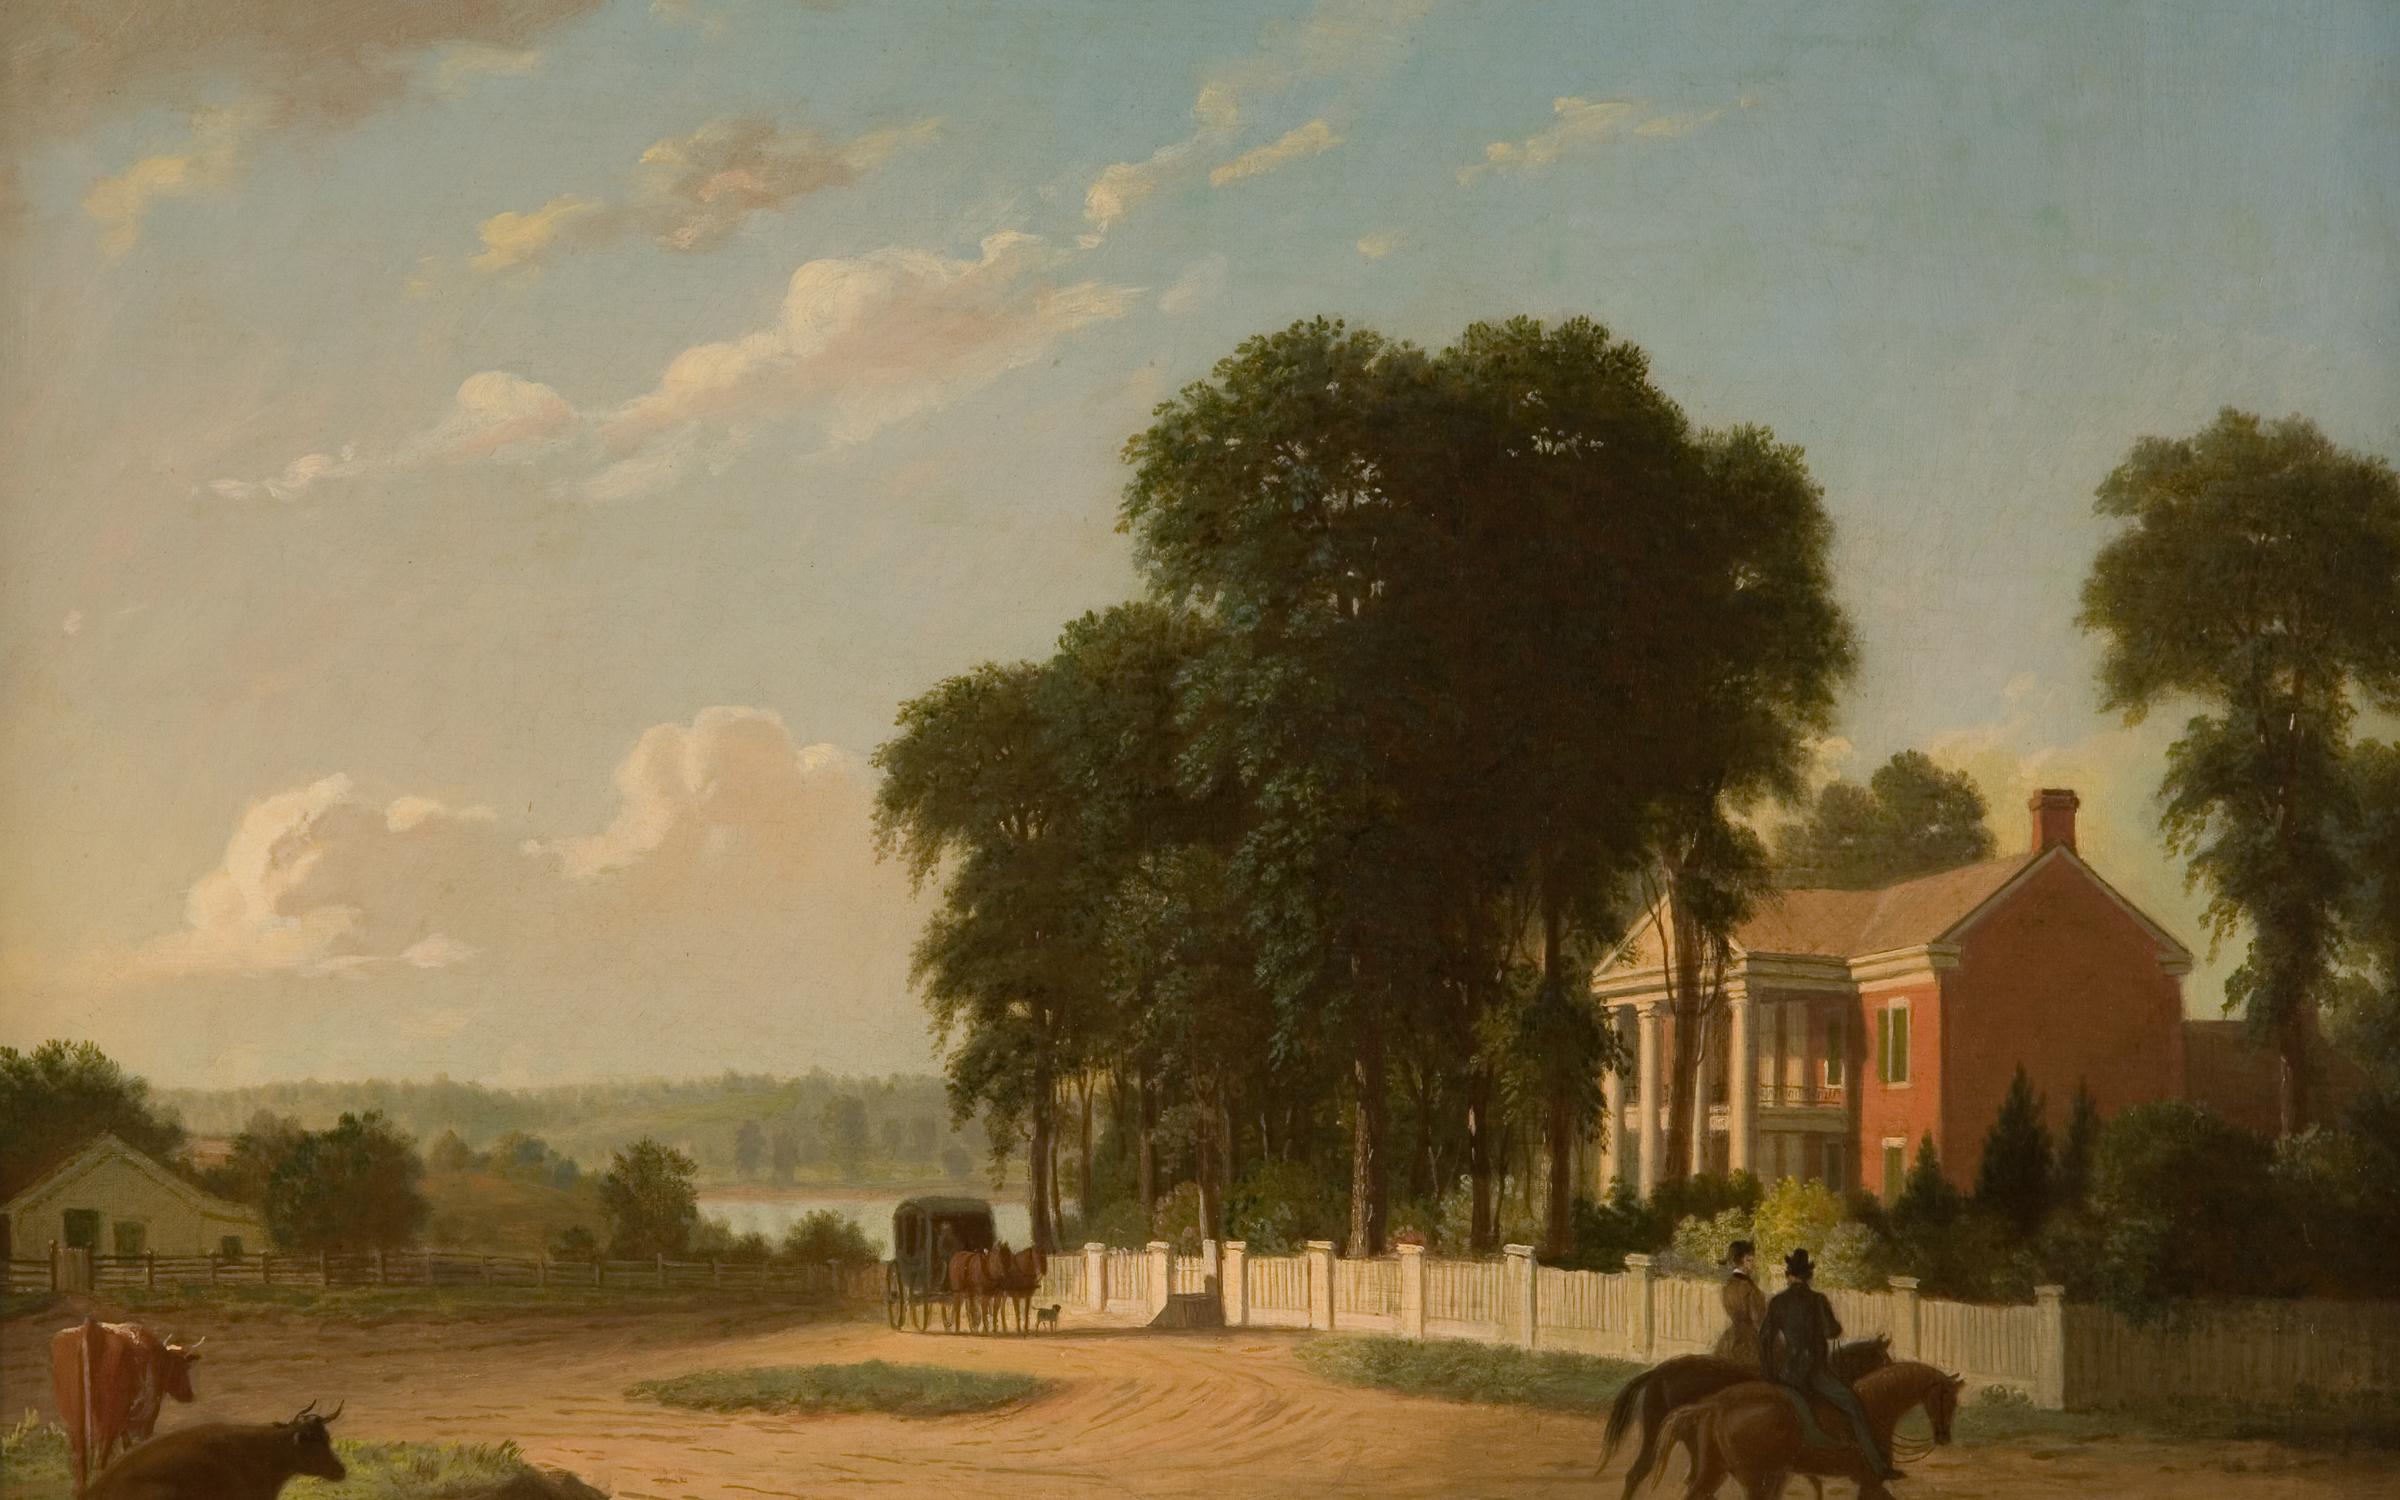 George Caleb Bingham (American, 1811-1879) Forest Hill (The Nelson Home in Booneville, Missouri), oil on canvas, In loving memory of our mother, Anna Louise Birch Stephens, donated by Mary Stephens DeWall, Margaret Stephens Anderson, Cordelia Stephens Birrell, and William Fulton Stephens, Jr., UMFA2007.12.2